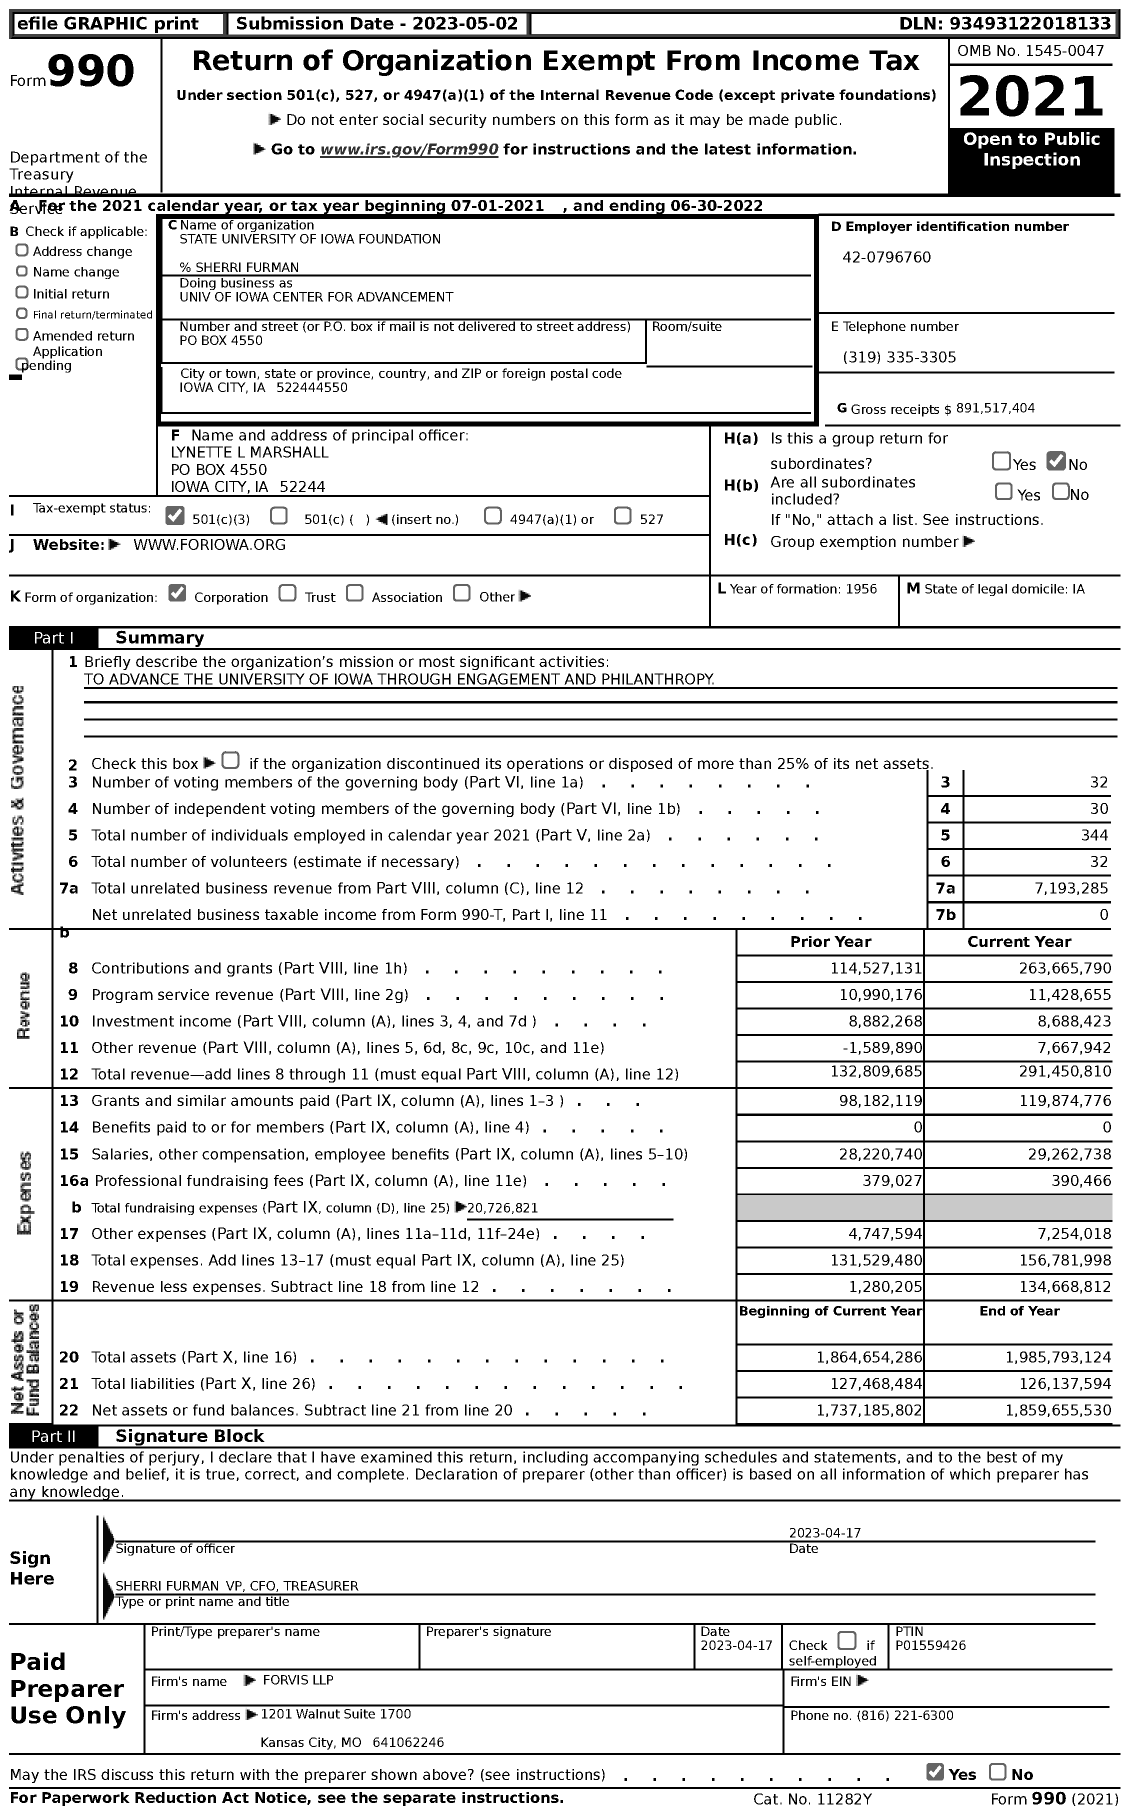 Image of first page of 2021 Form 990 for Univ of Iowa Center for Advancement